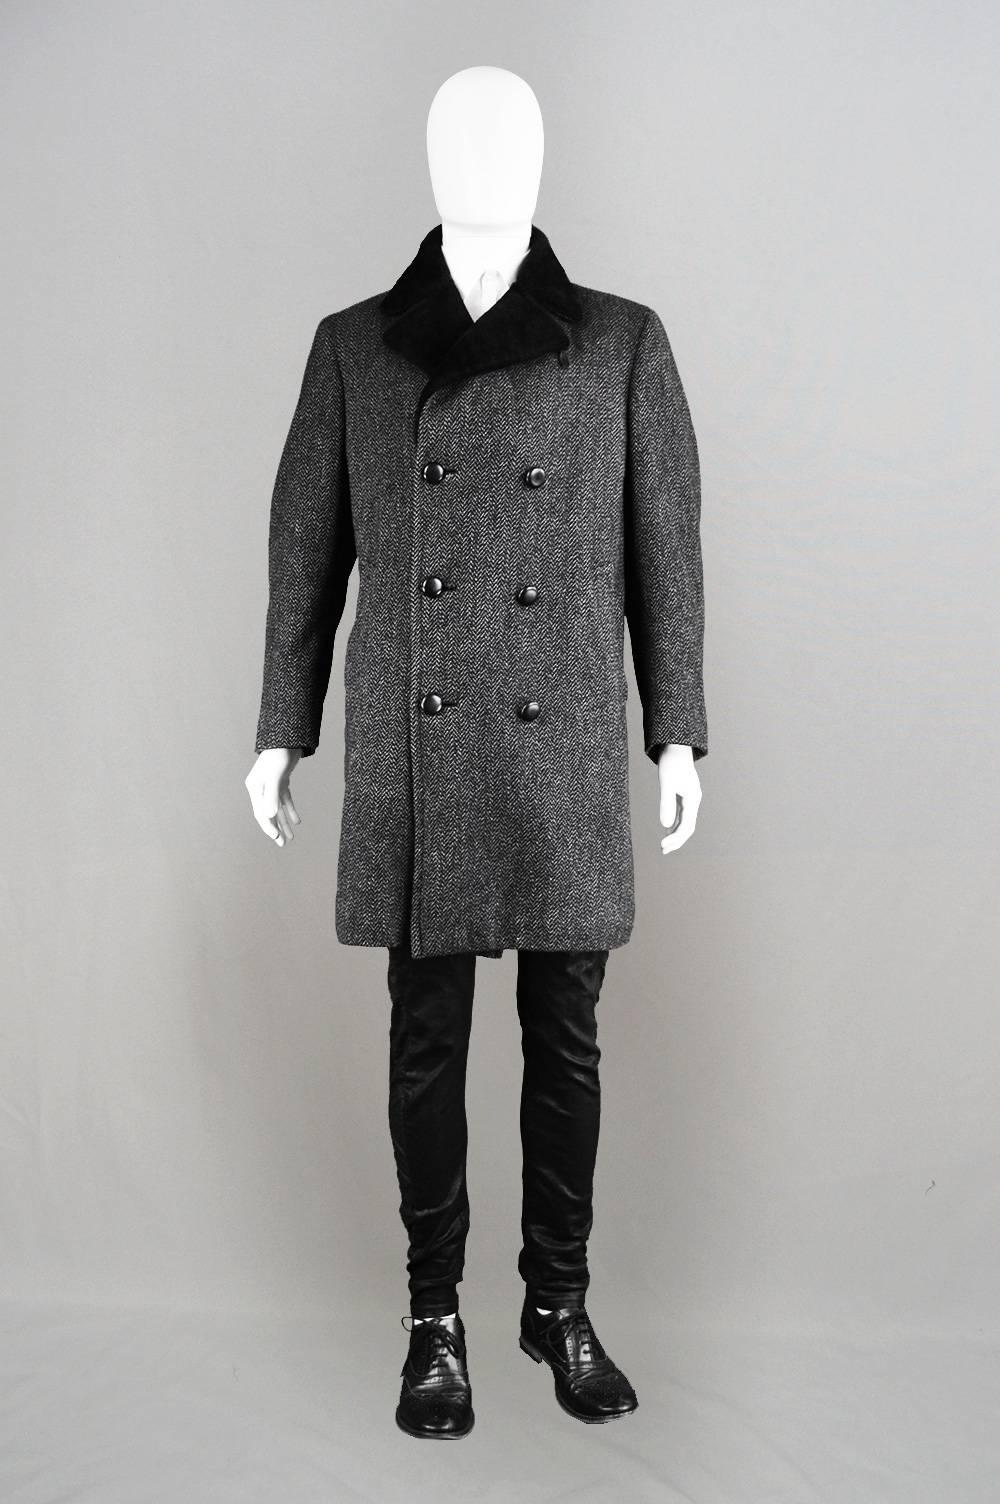 An incredibly stylish vintage men's overcoat from the 1960's by British luxury label Aquascutum. With double breasted buttons and a timeless herringbone check pattern, this is a classic piece that is sure to be on-trend any year but with a faux fur